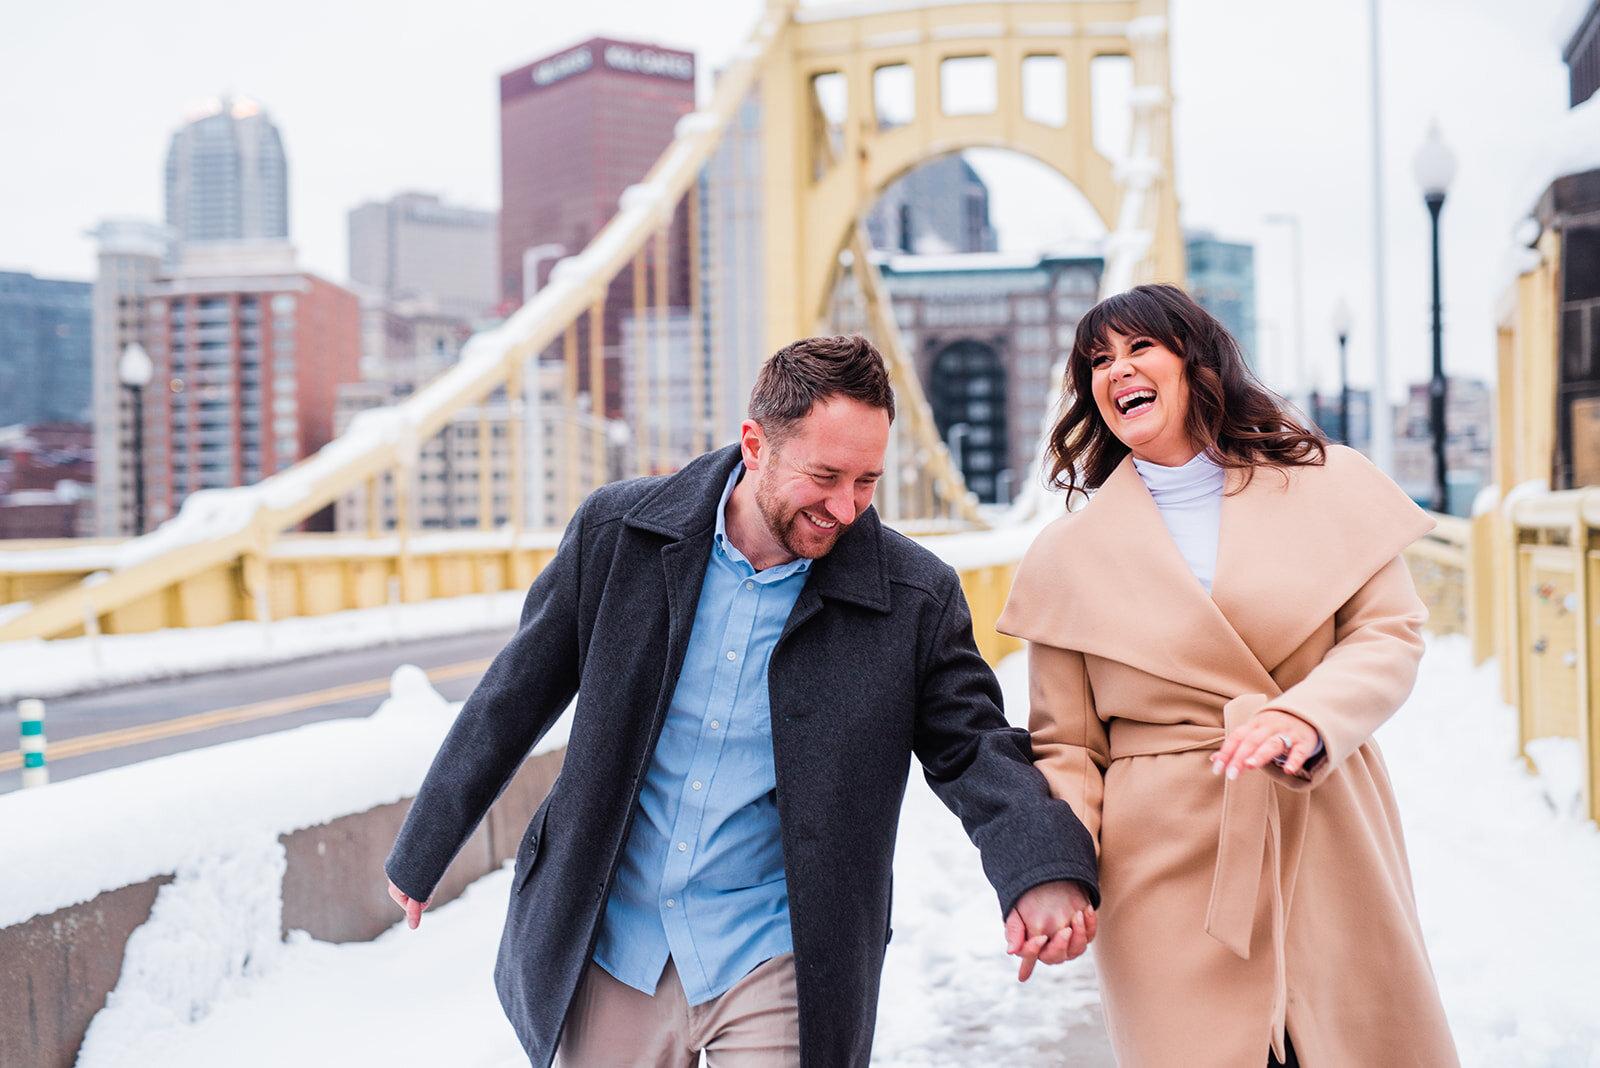 winter pittsburgh engagement session